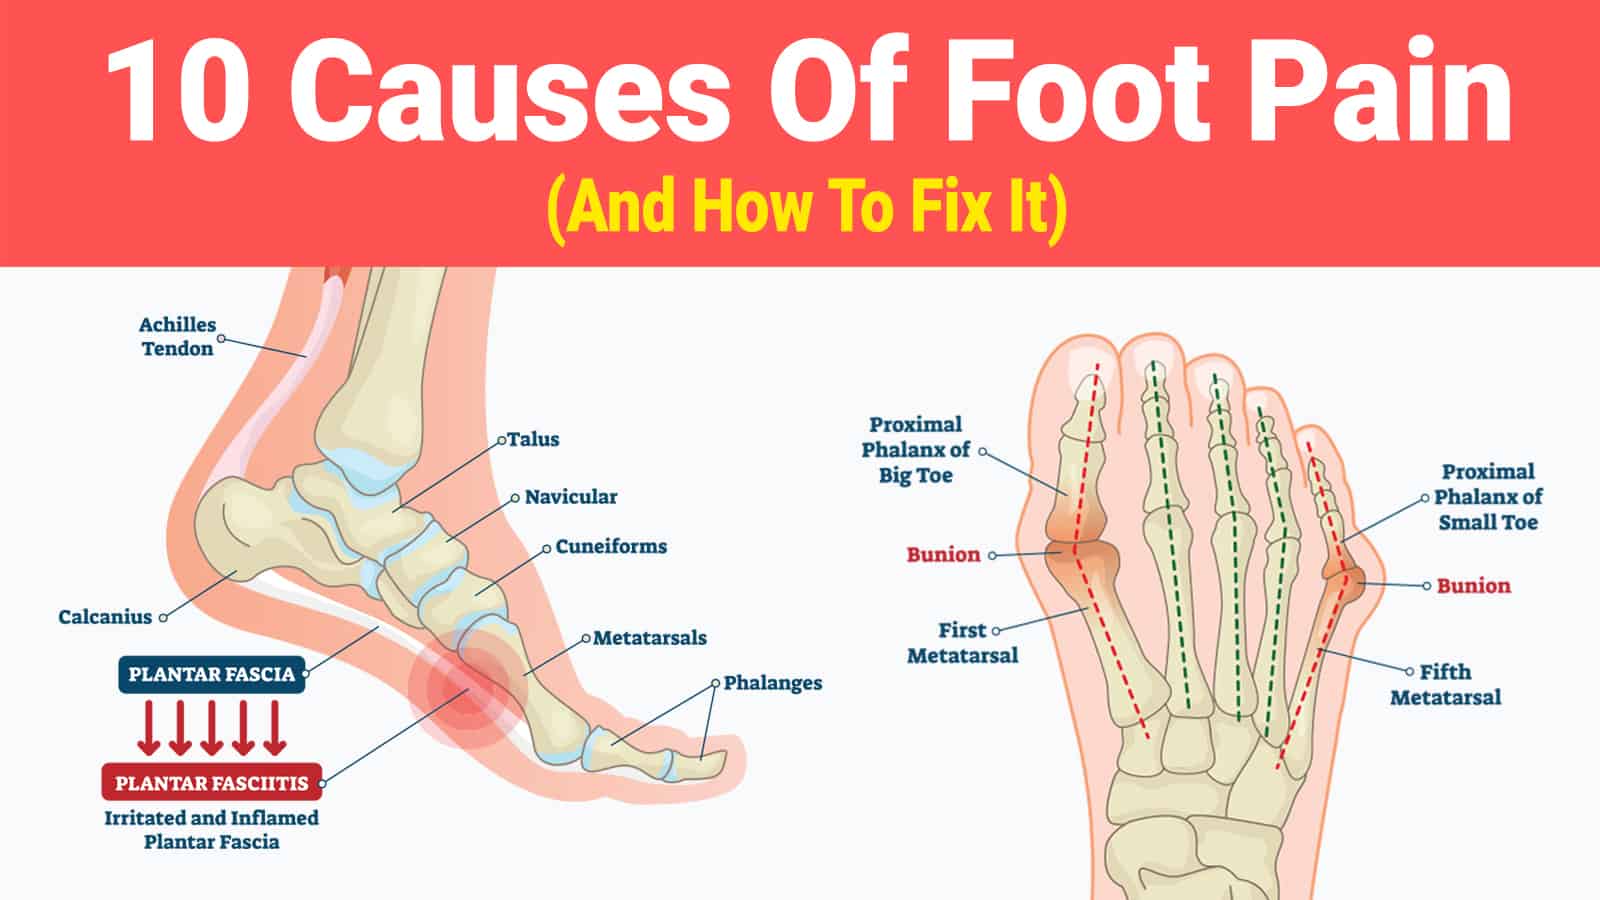 10 Causes Of Foot Pain And How To Fix It 